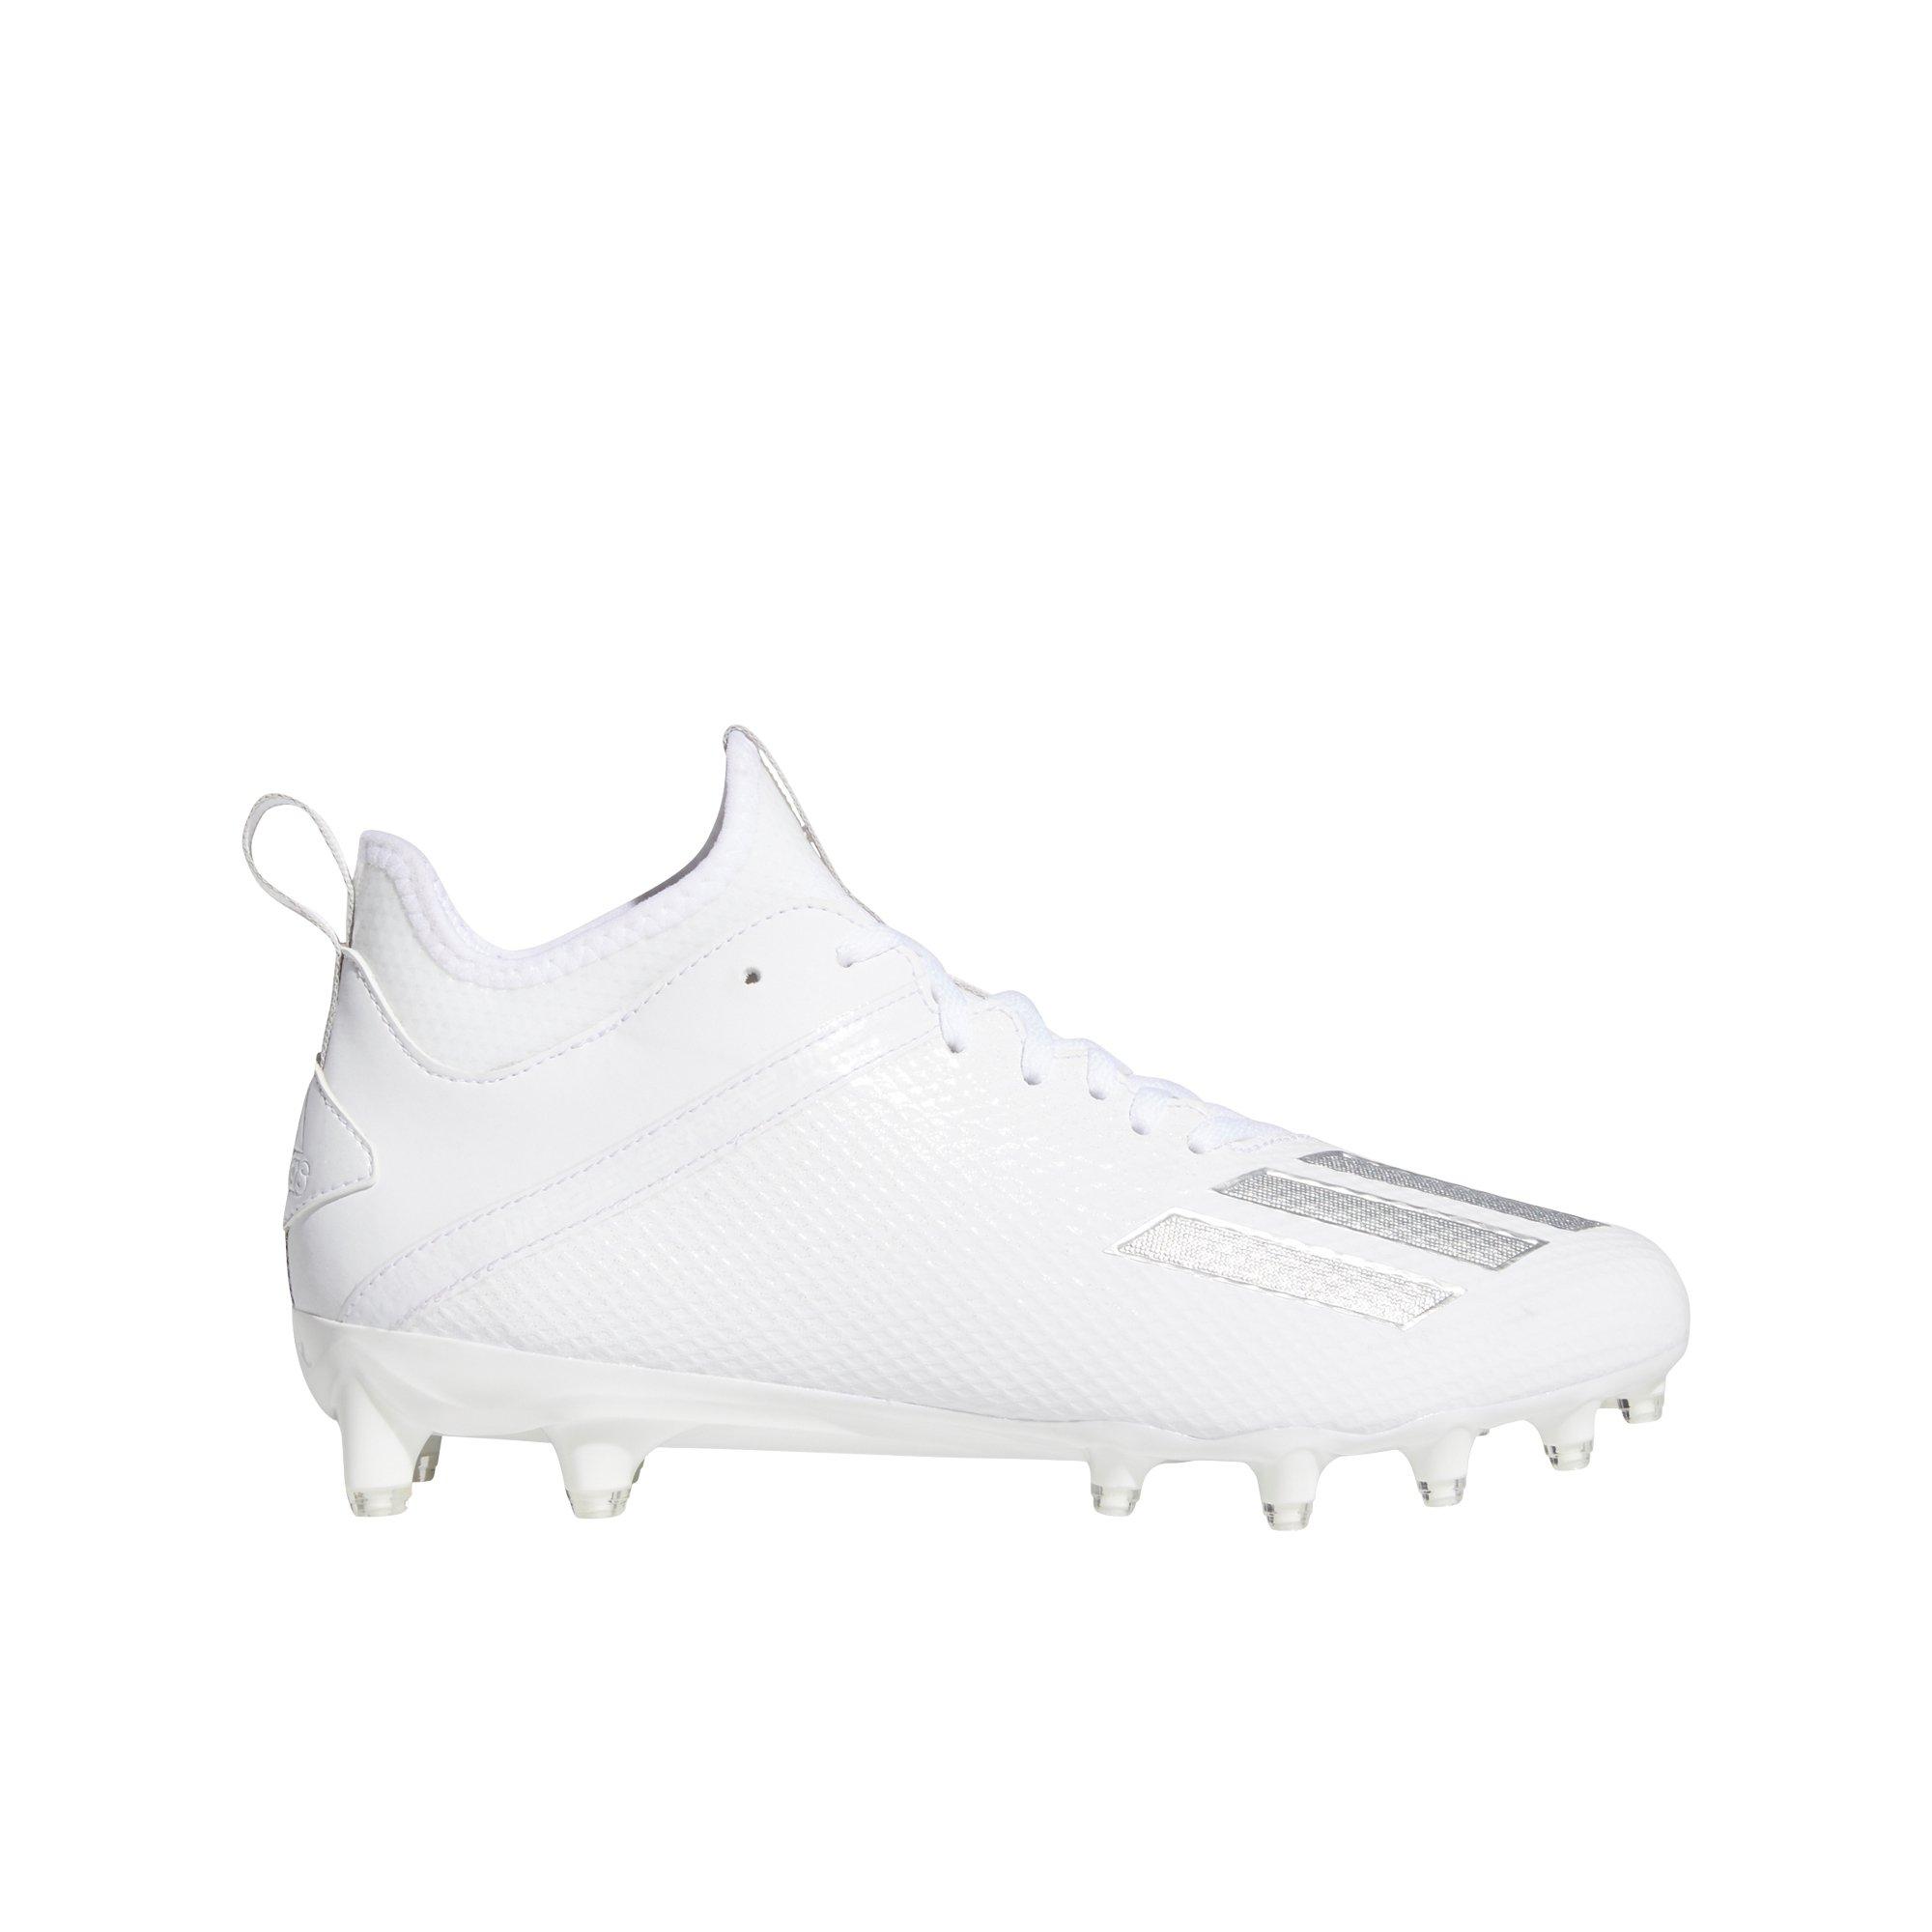 black and silver football cleats